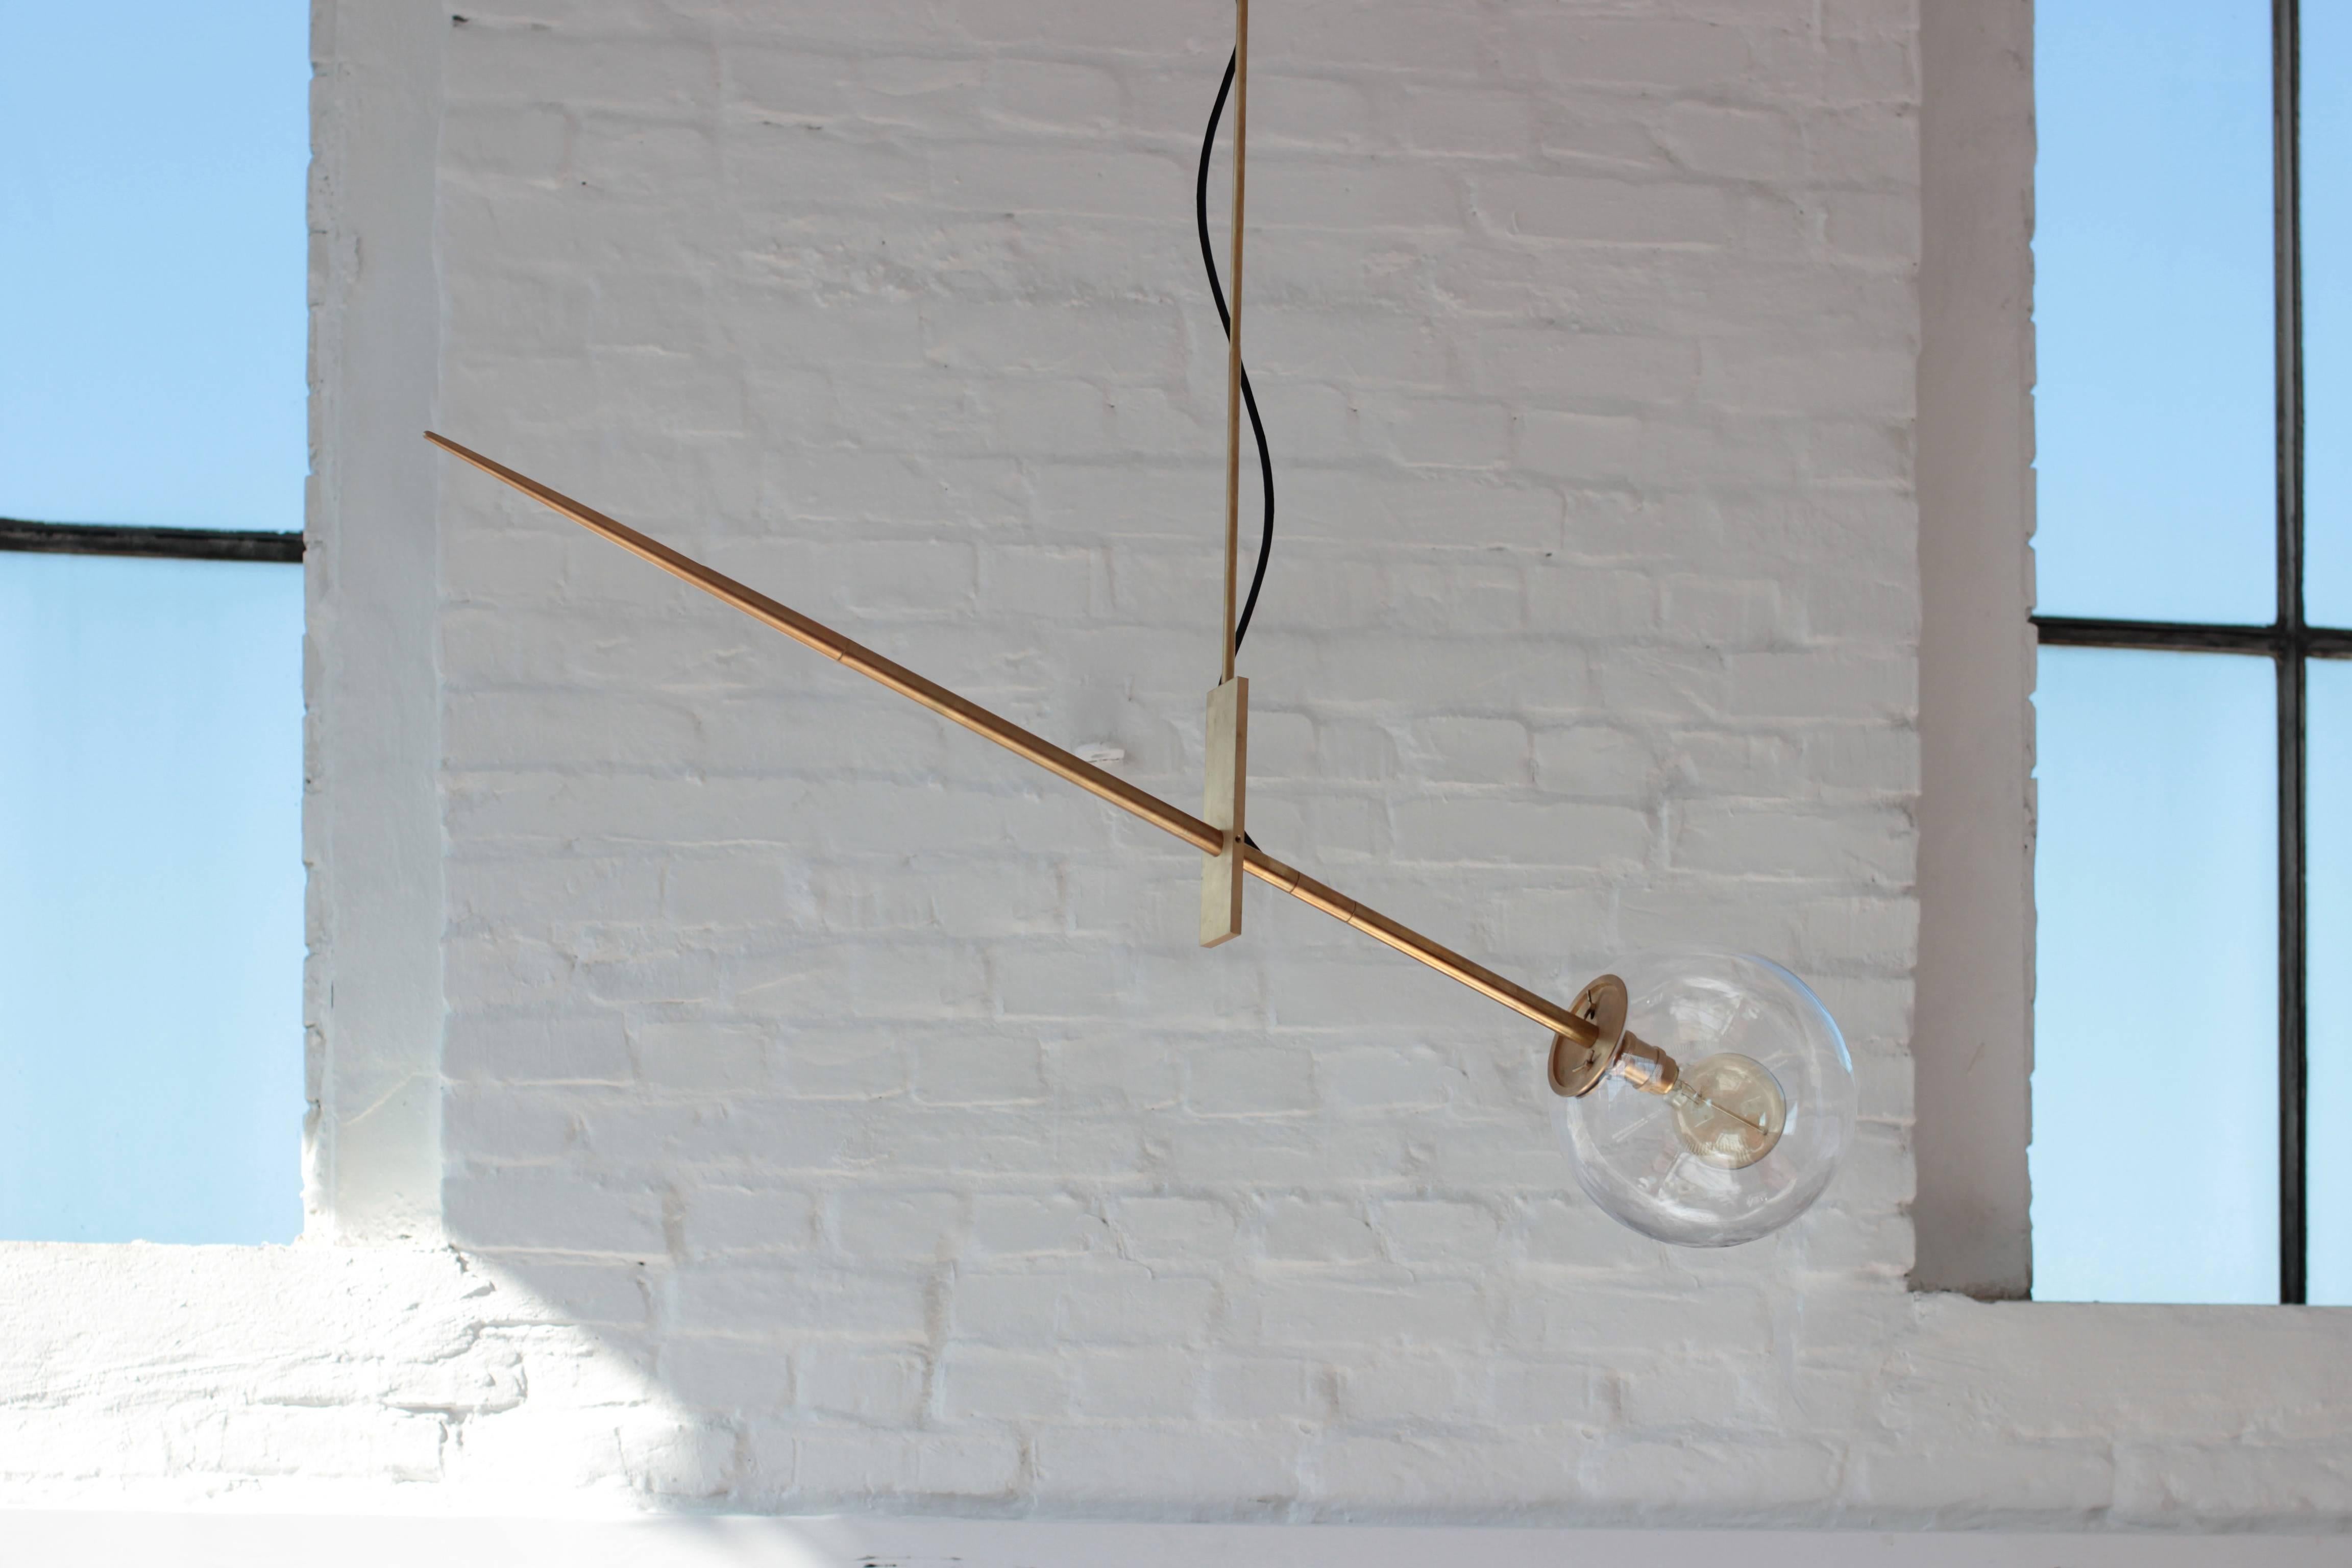 Hasta Brass Hanging Lamp by Jan Garncarek
Brass ceiling lamp with a glass shade. The elements are made of full brass.
The supplied cable is available in two colors, black or red. Best matches the decorative bulb.
Dimensions: D 25 x W 120 x H 78 cm.